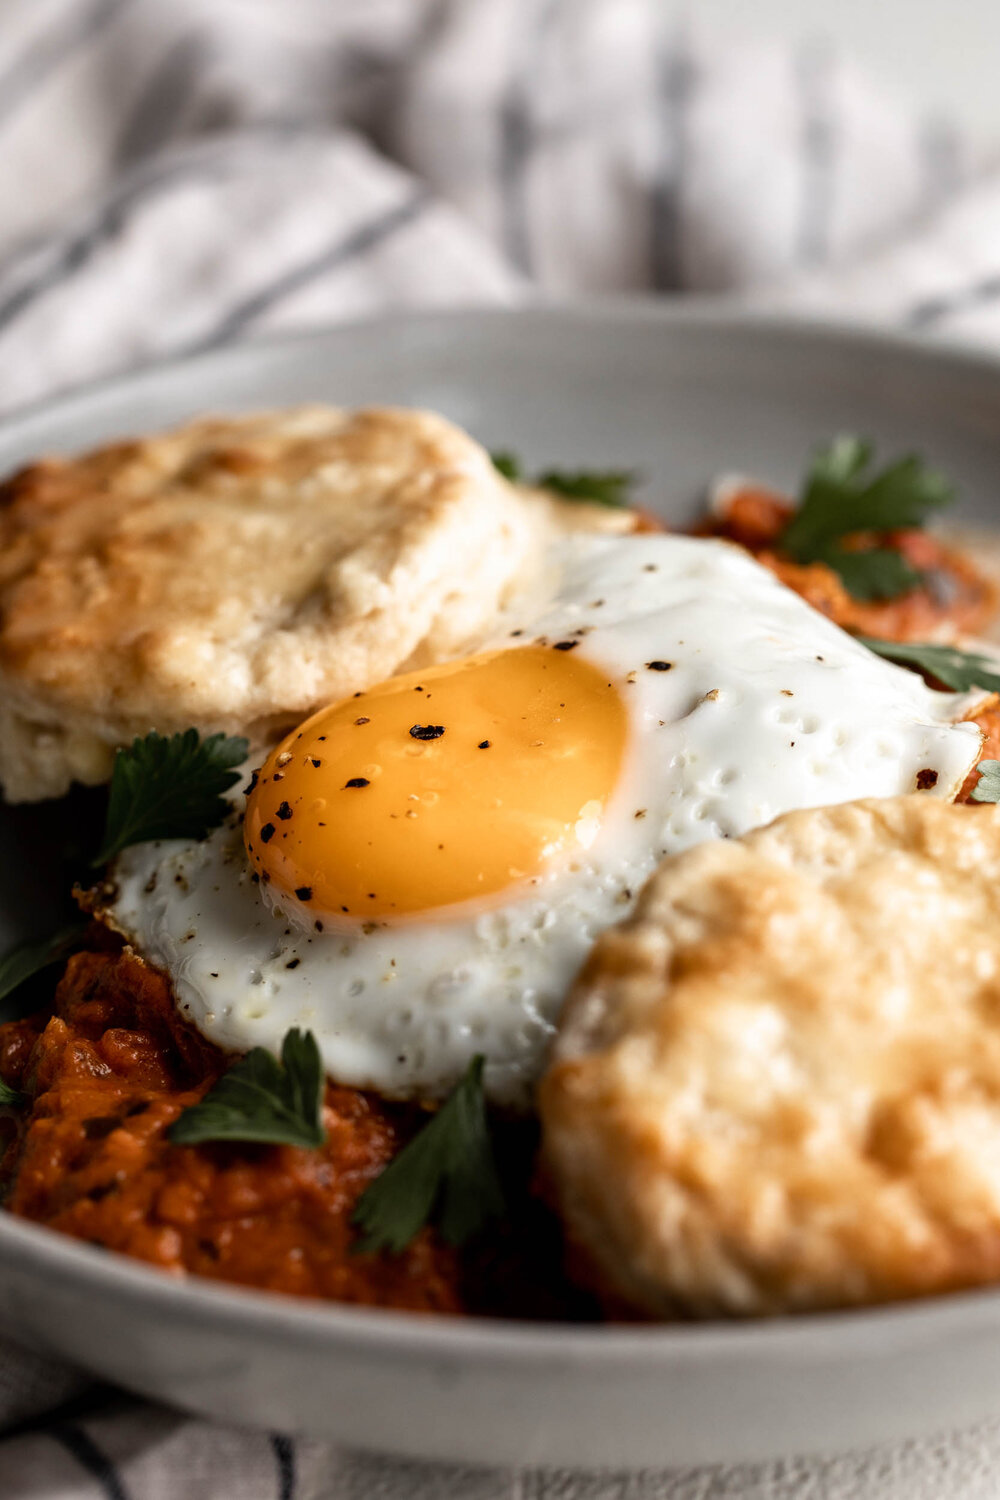 Bertolli Rustic Cut Brunch Buttermilk Biscuits with Turkey and Southern Tomato Gravy-33.jpg